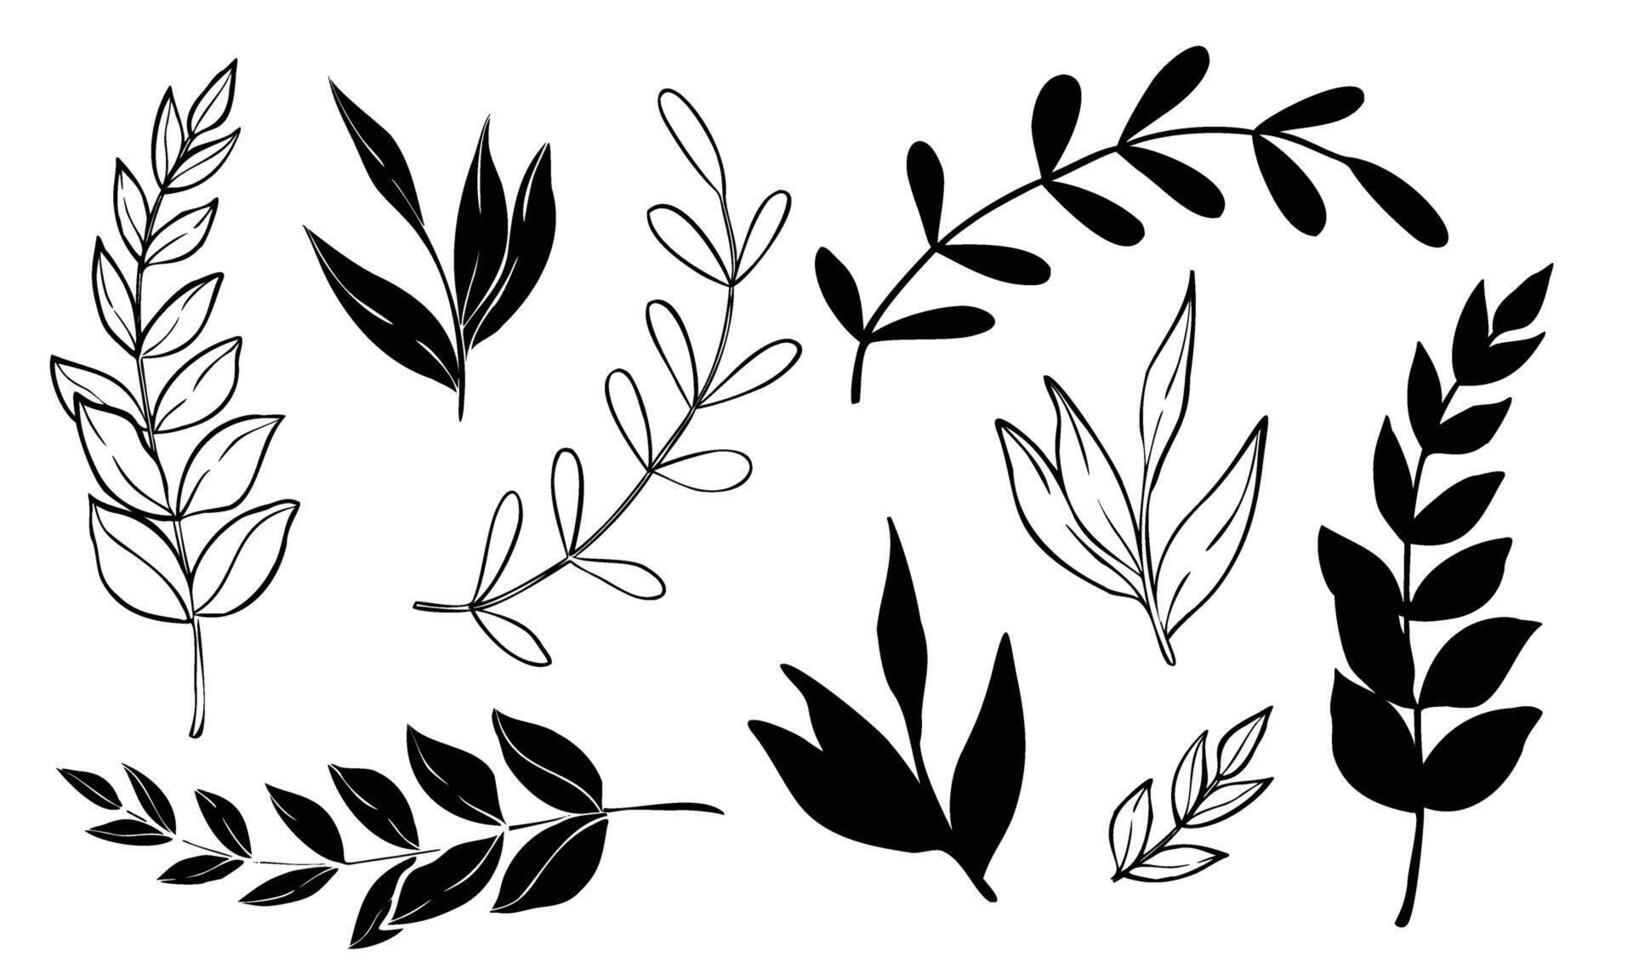 plants and branches with leaves set. Hand drawn botanical illustration painted by black inks on isolated background in outline style. Silhouette of nature elements for icon or logo. Line art vector